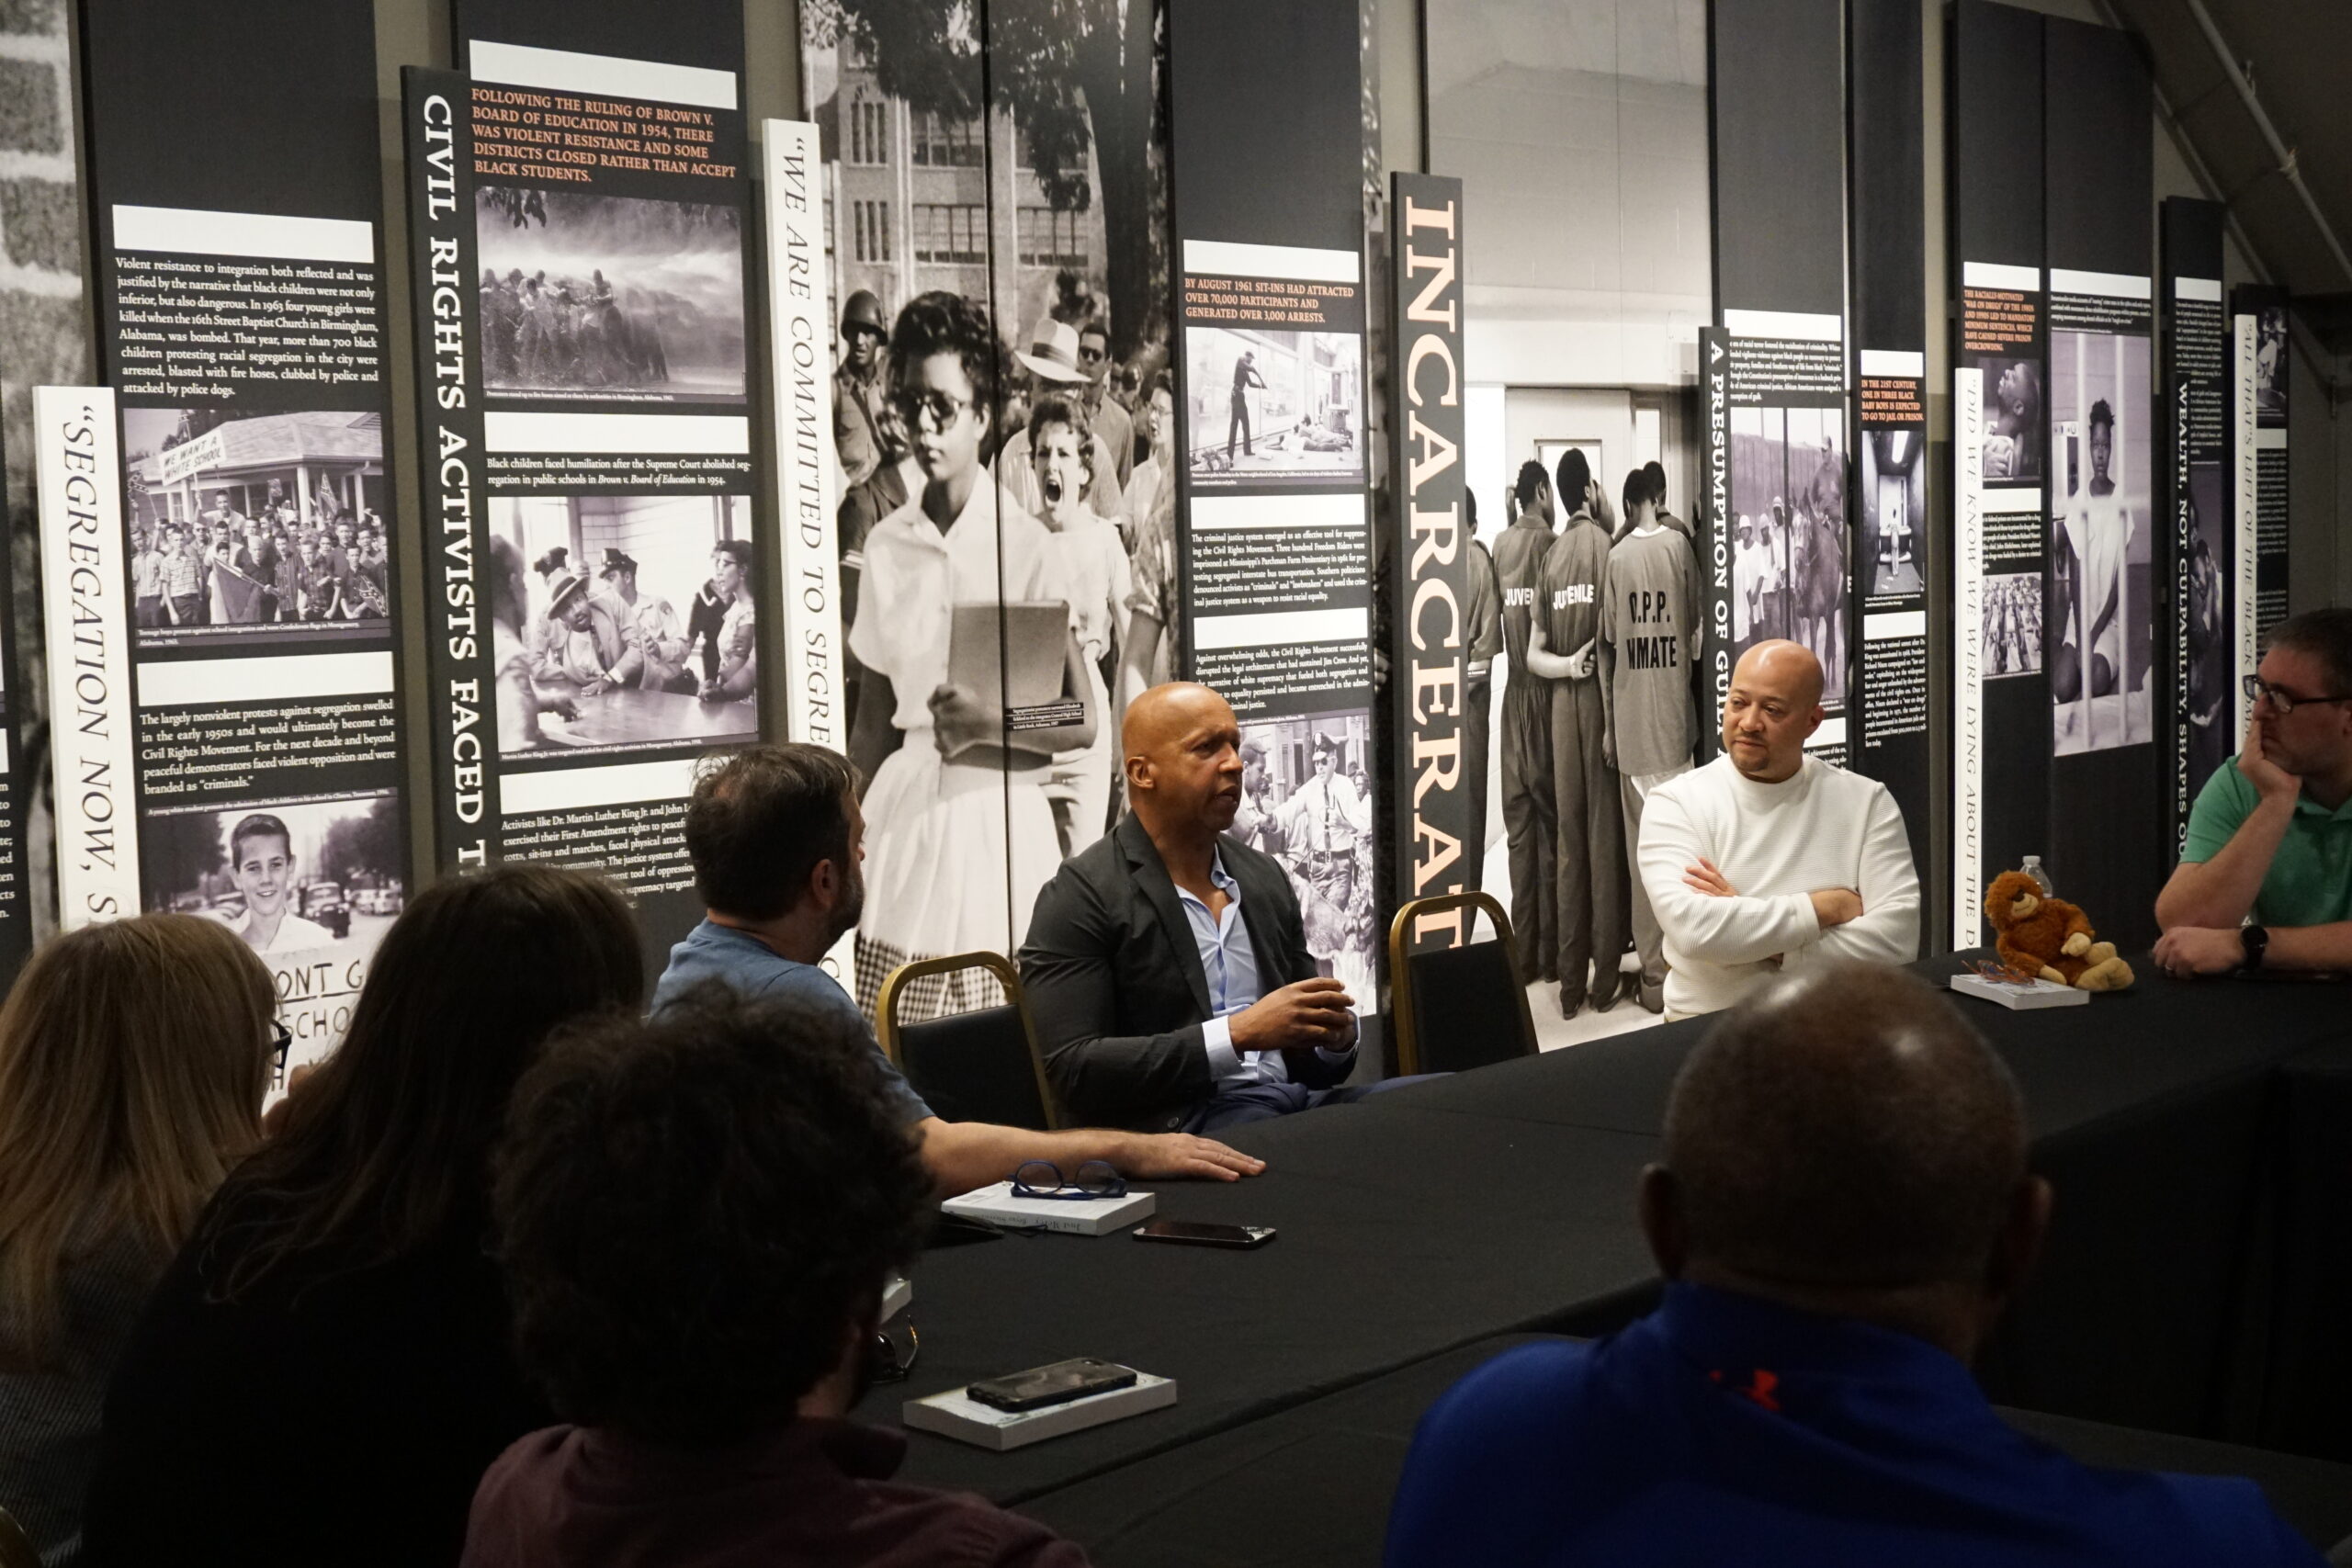 Bryan Stevenson pictured speaking with the Action Network & Action Builder team at the Legacy Museum.